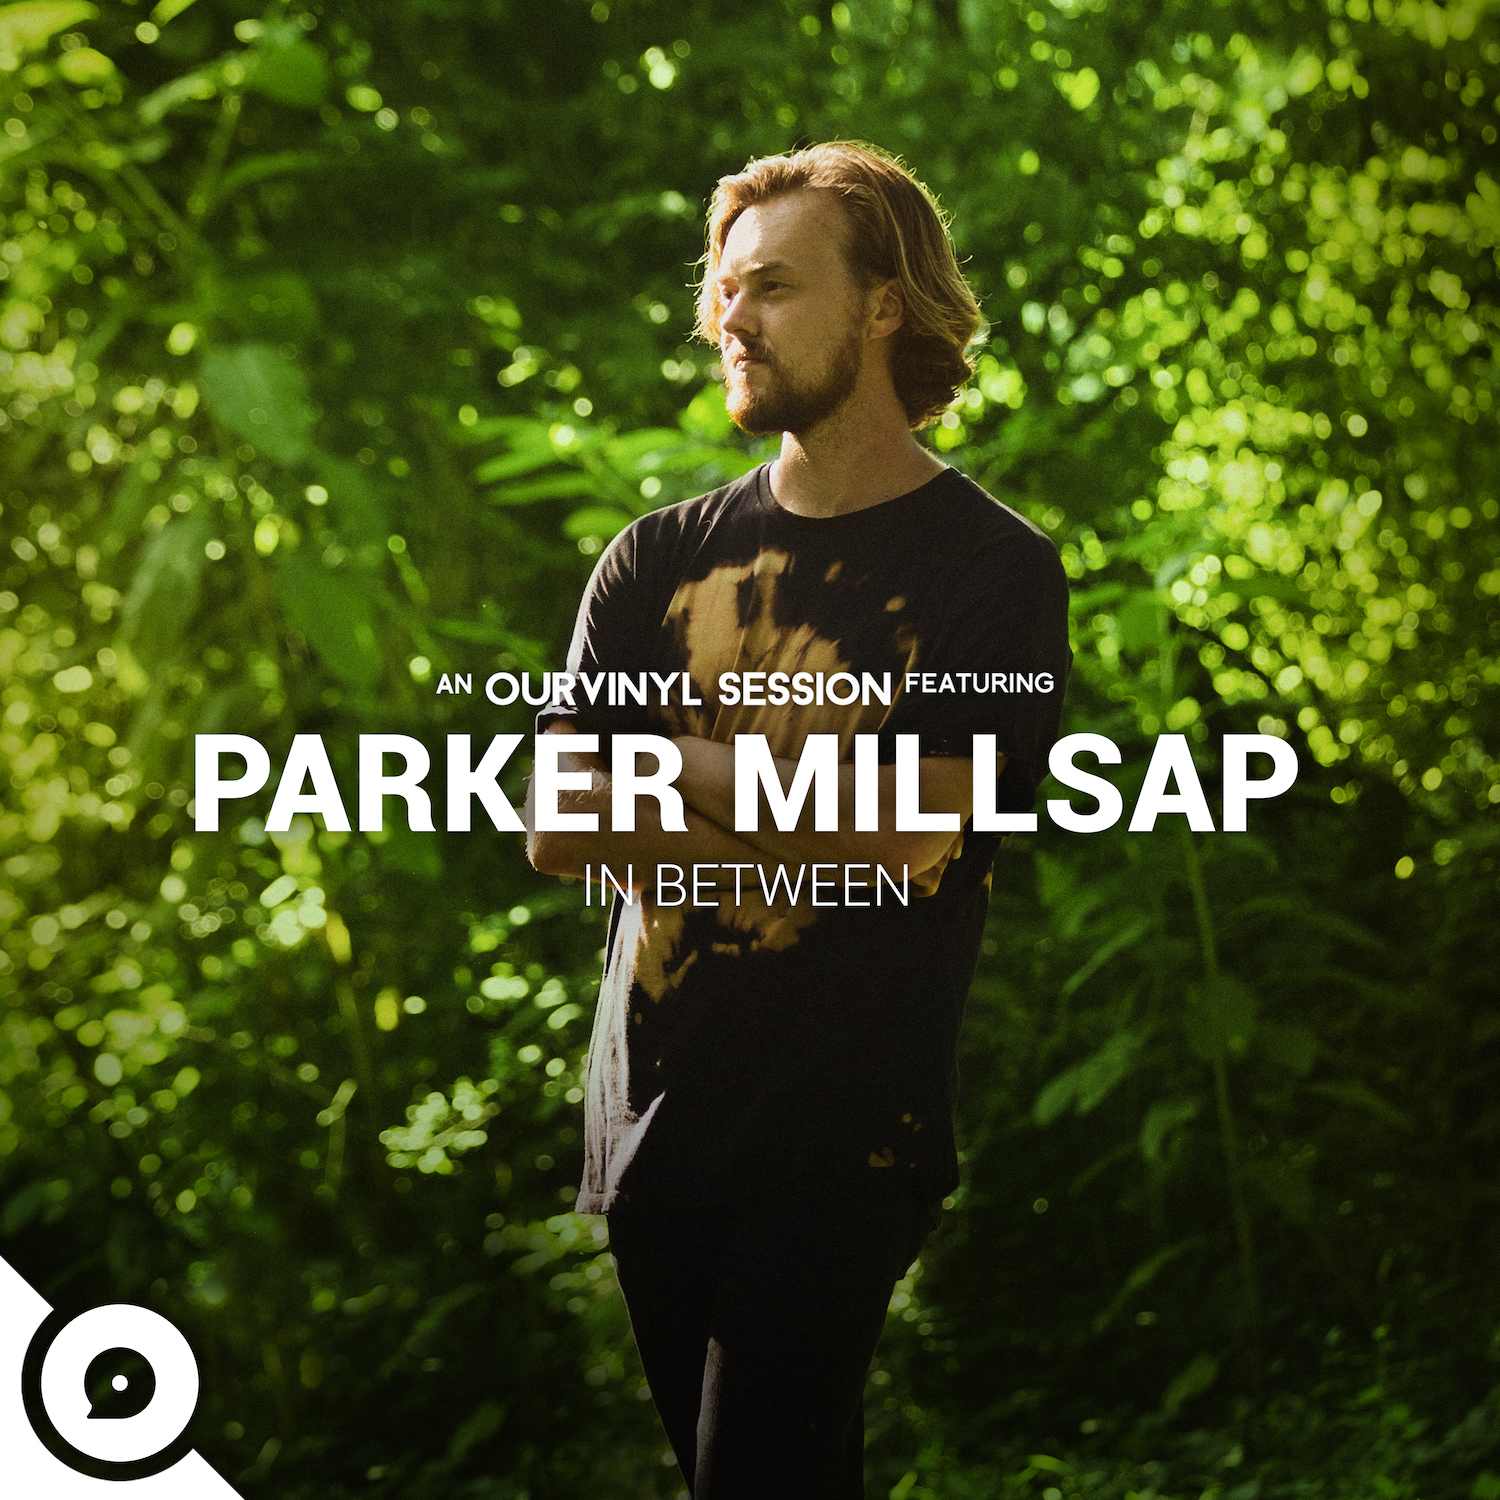 Parker Millsap NMF Country